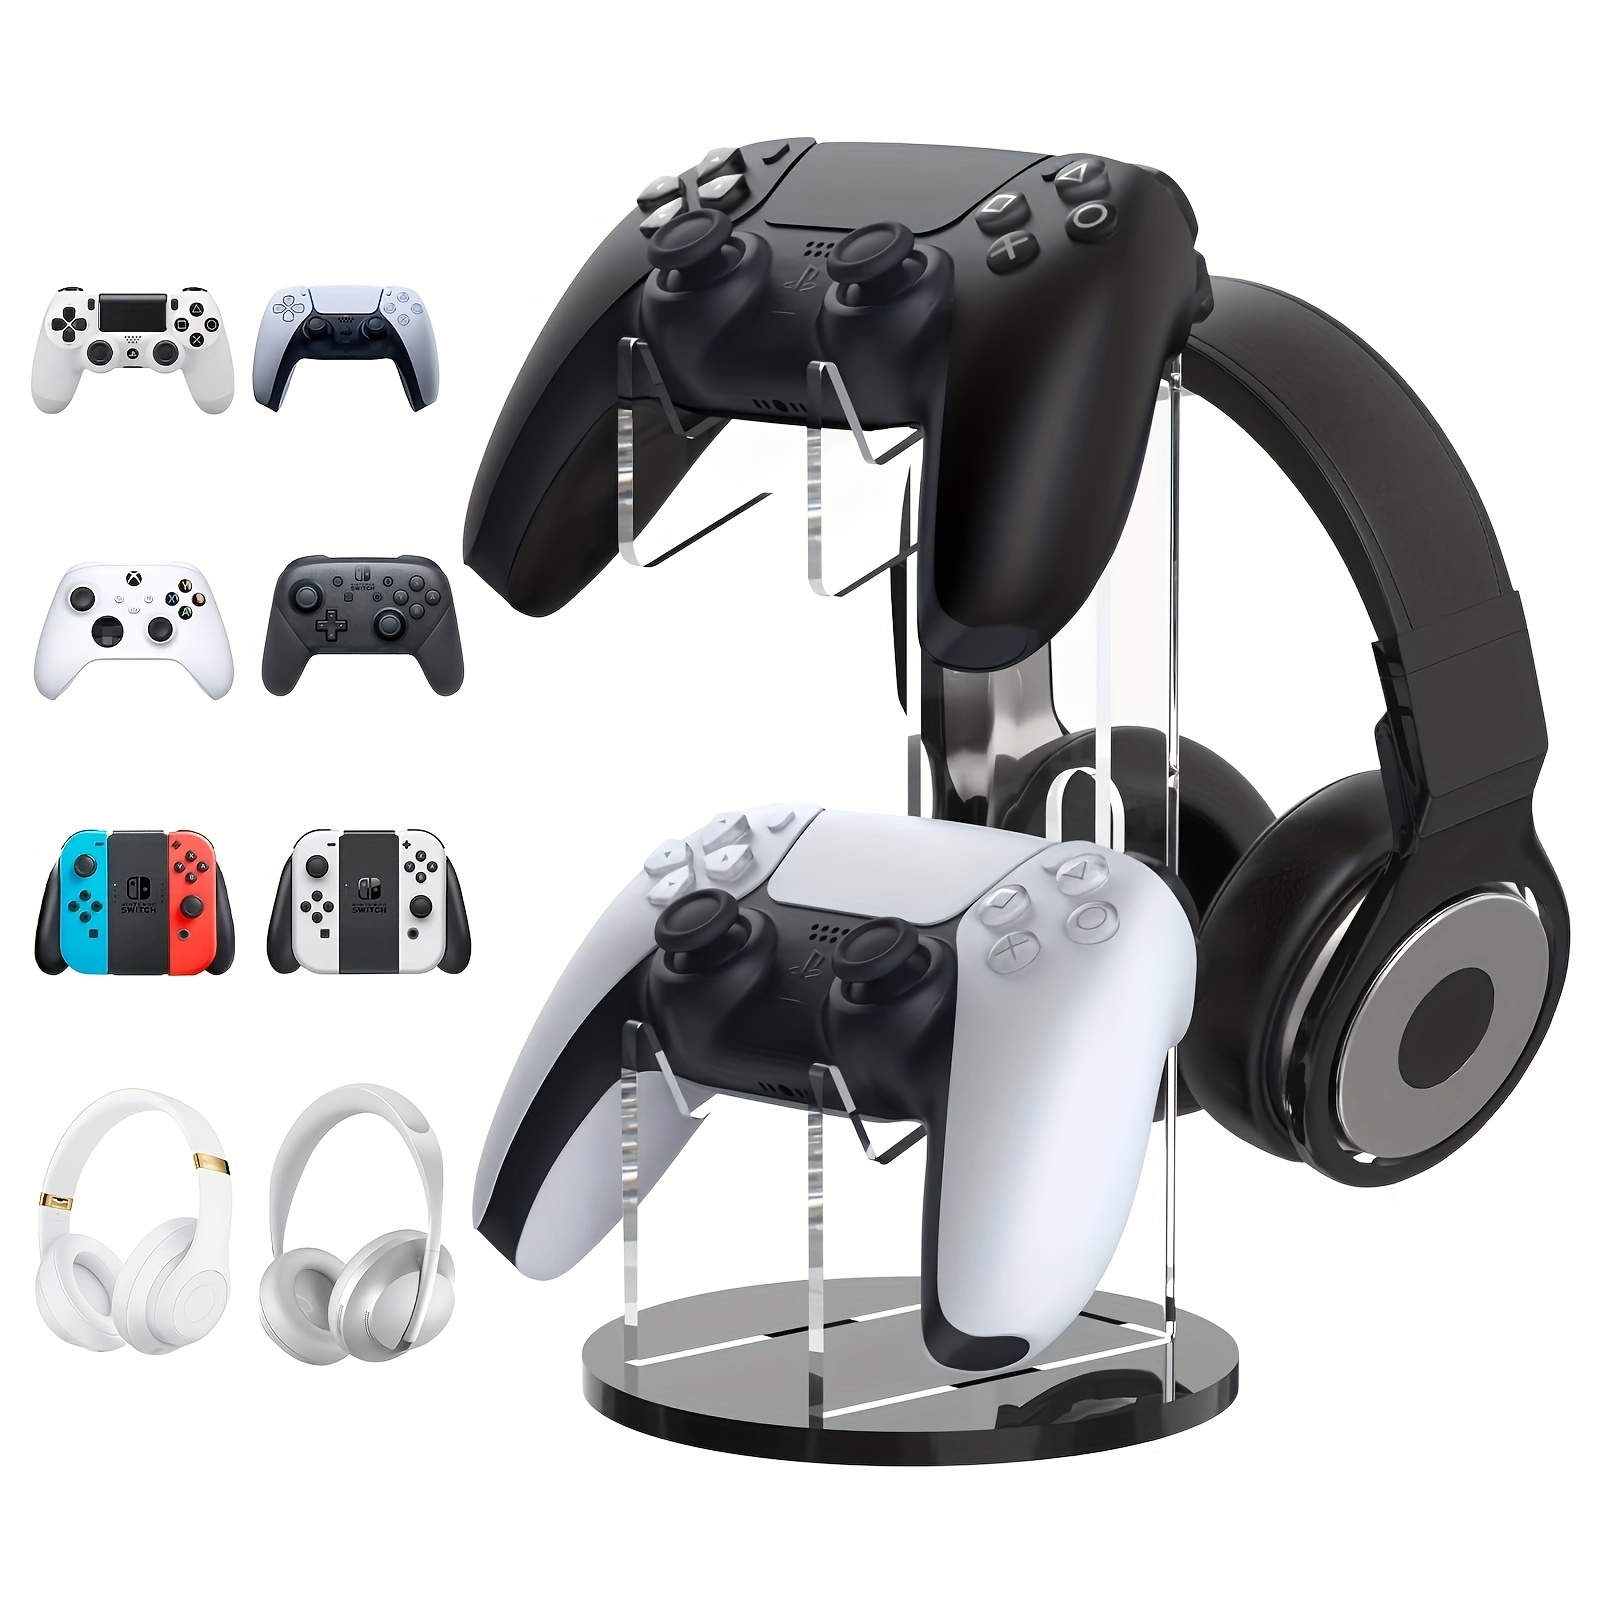 

Universal Stand For Gamepad And Headphone Stand, 2 In 1 Game Controller Stand Holder Storage Organizer For Ps5